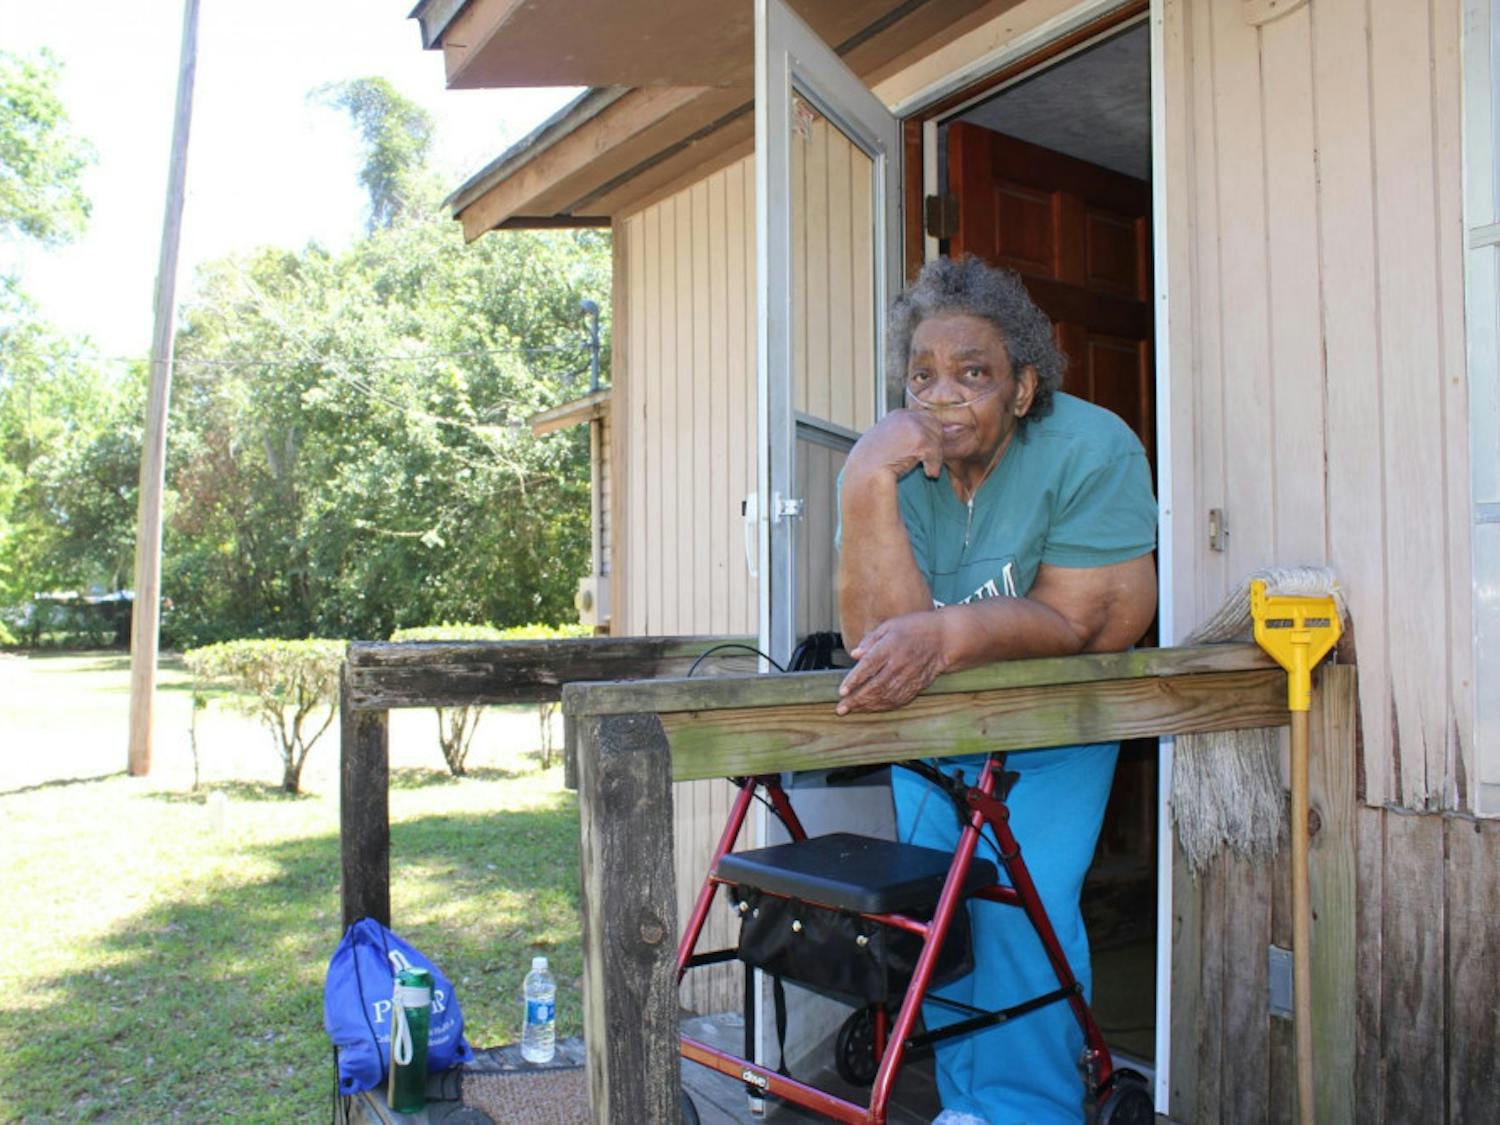 Mamie Leath, 89, watches as UF students help clear fallen leaves from her home in Gainesville’s Porters Community on Saturday as a part of UF Student Government’s inaugural The Big Event. Leath said she felt grateful the students volunteered their time clearing her yard of leaves and miscellaneous junk, like rusted bicycles and an armchair. 